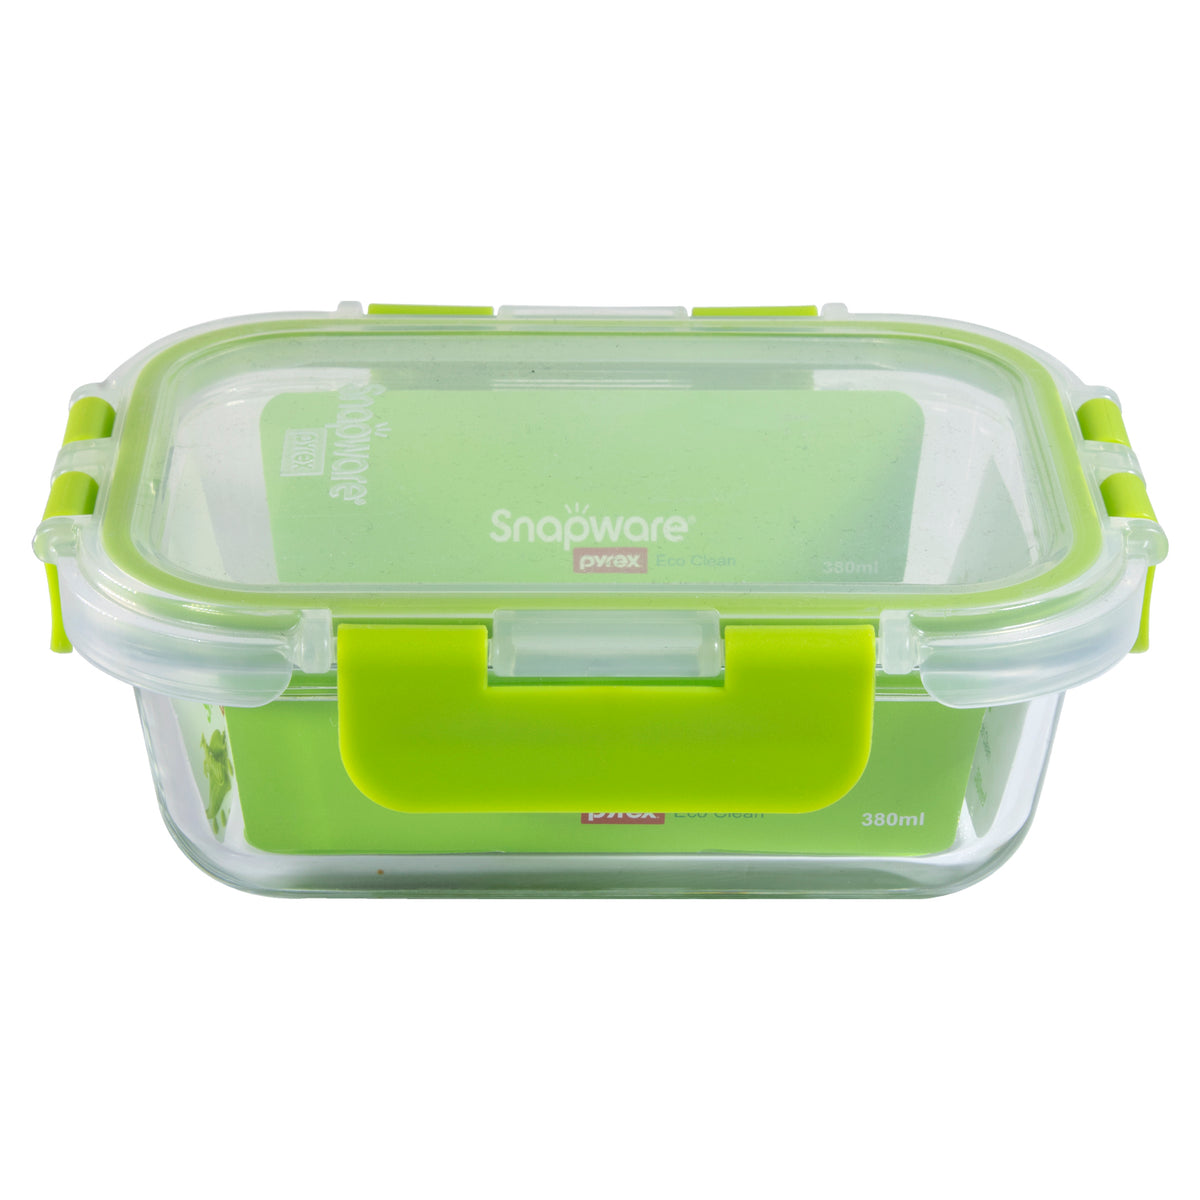 Snapware Set Of 3 Leak-Proof Eco Clean Glass Storage Container with Ai –  Corellebrands